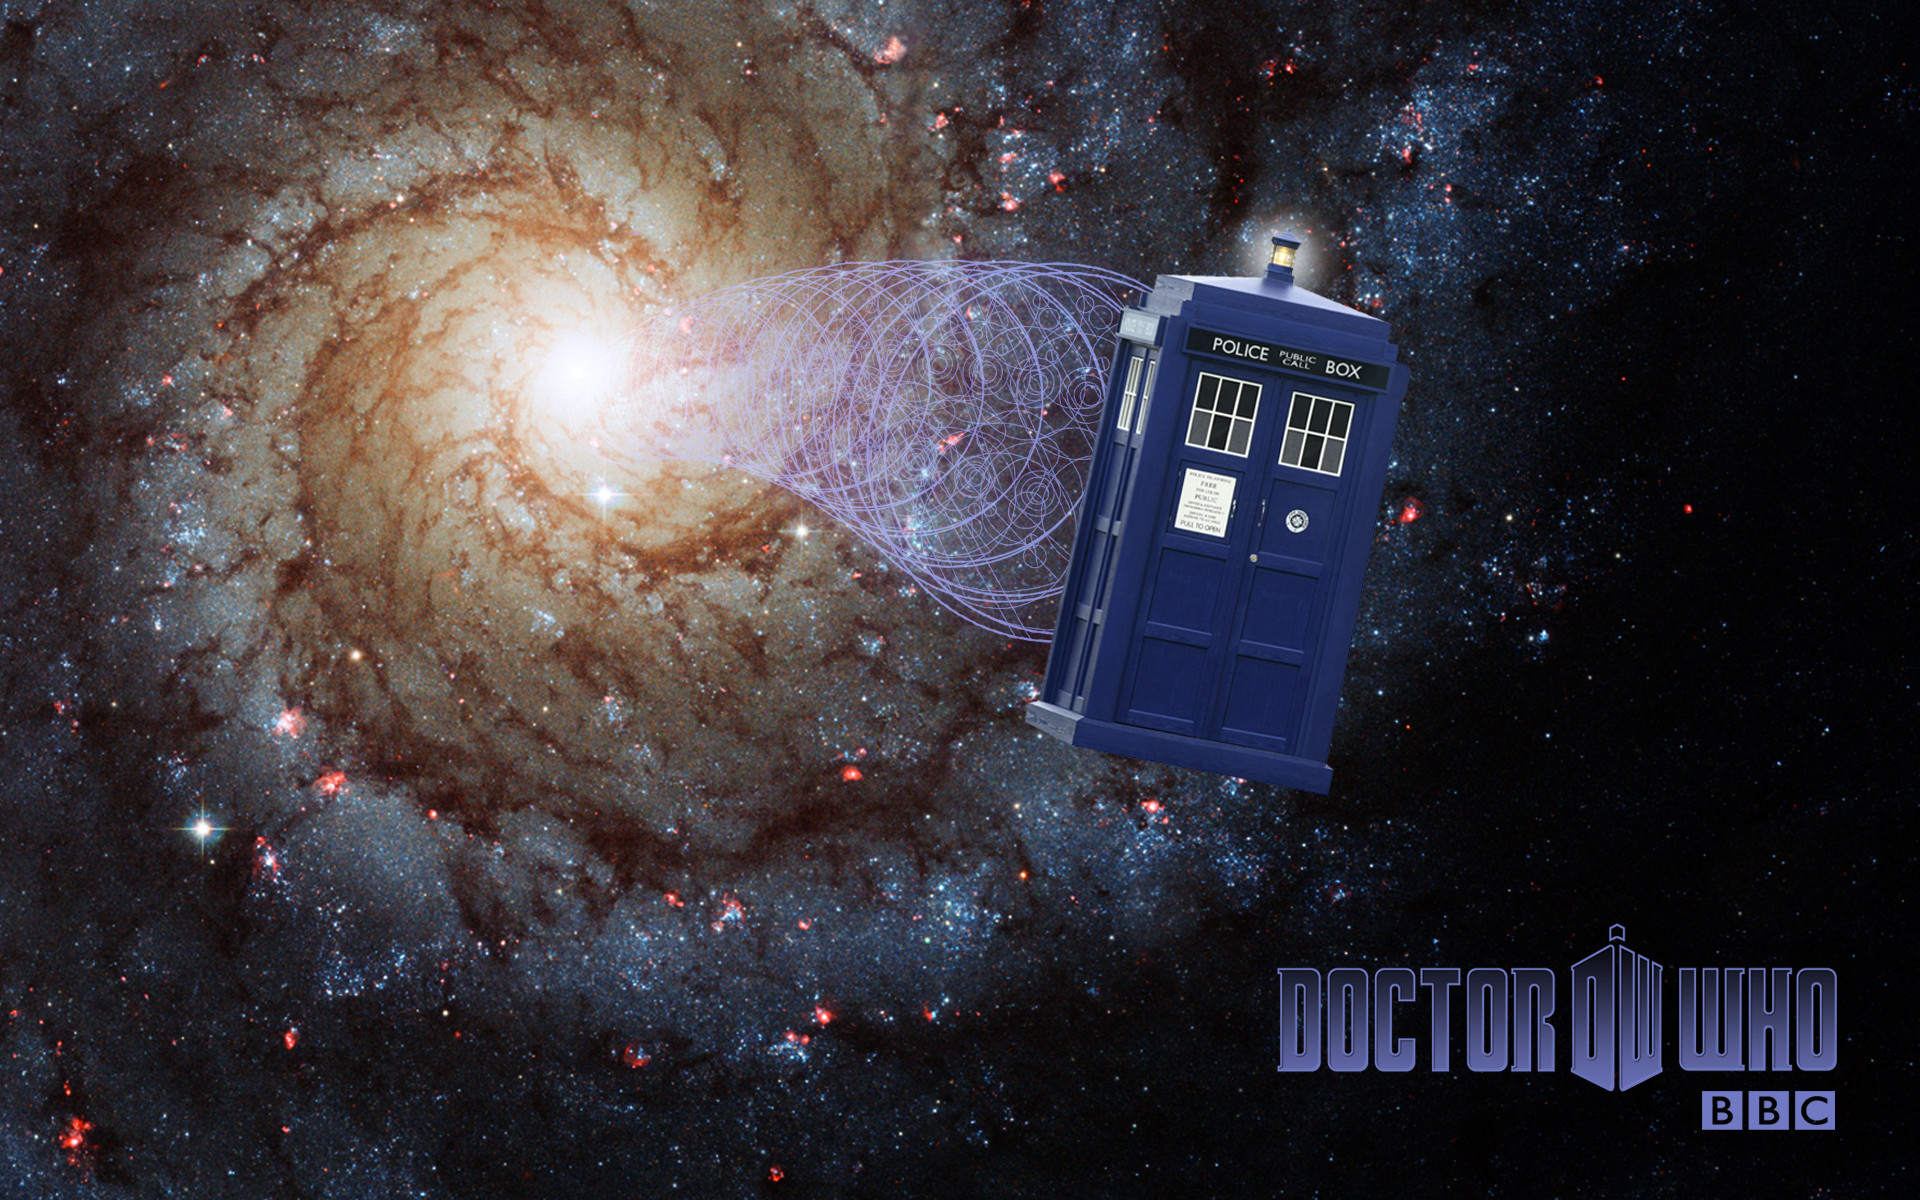 1920x1200 Download Wallpaper 1920x1080 Doctor who, Back to the future, Art ..